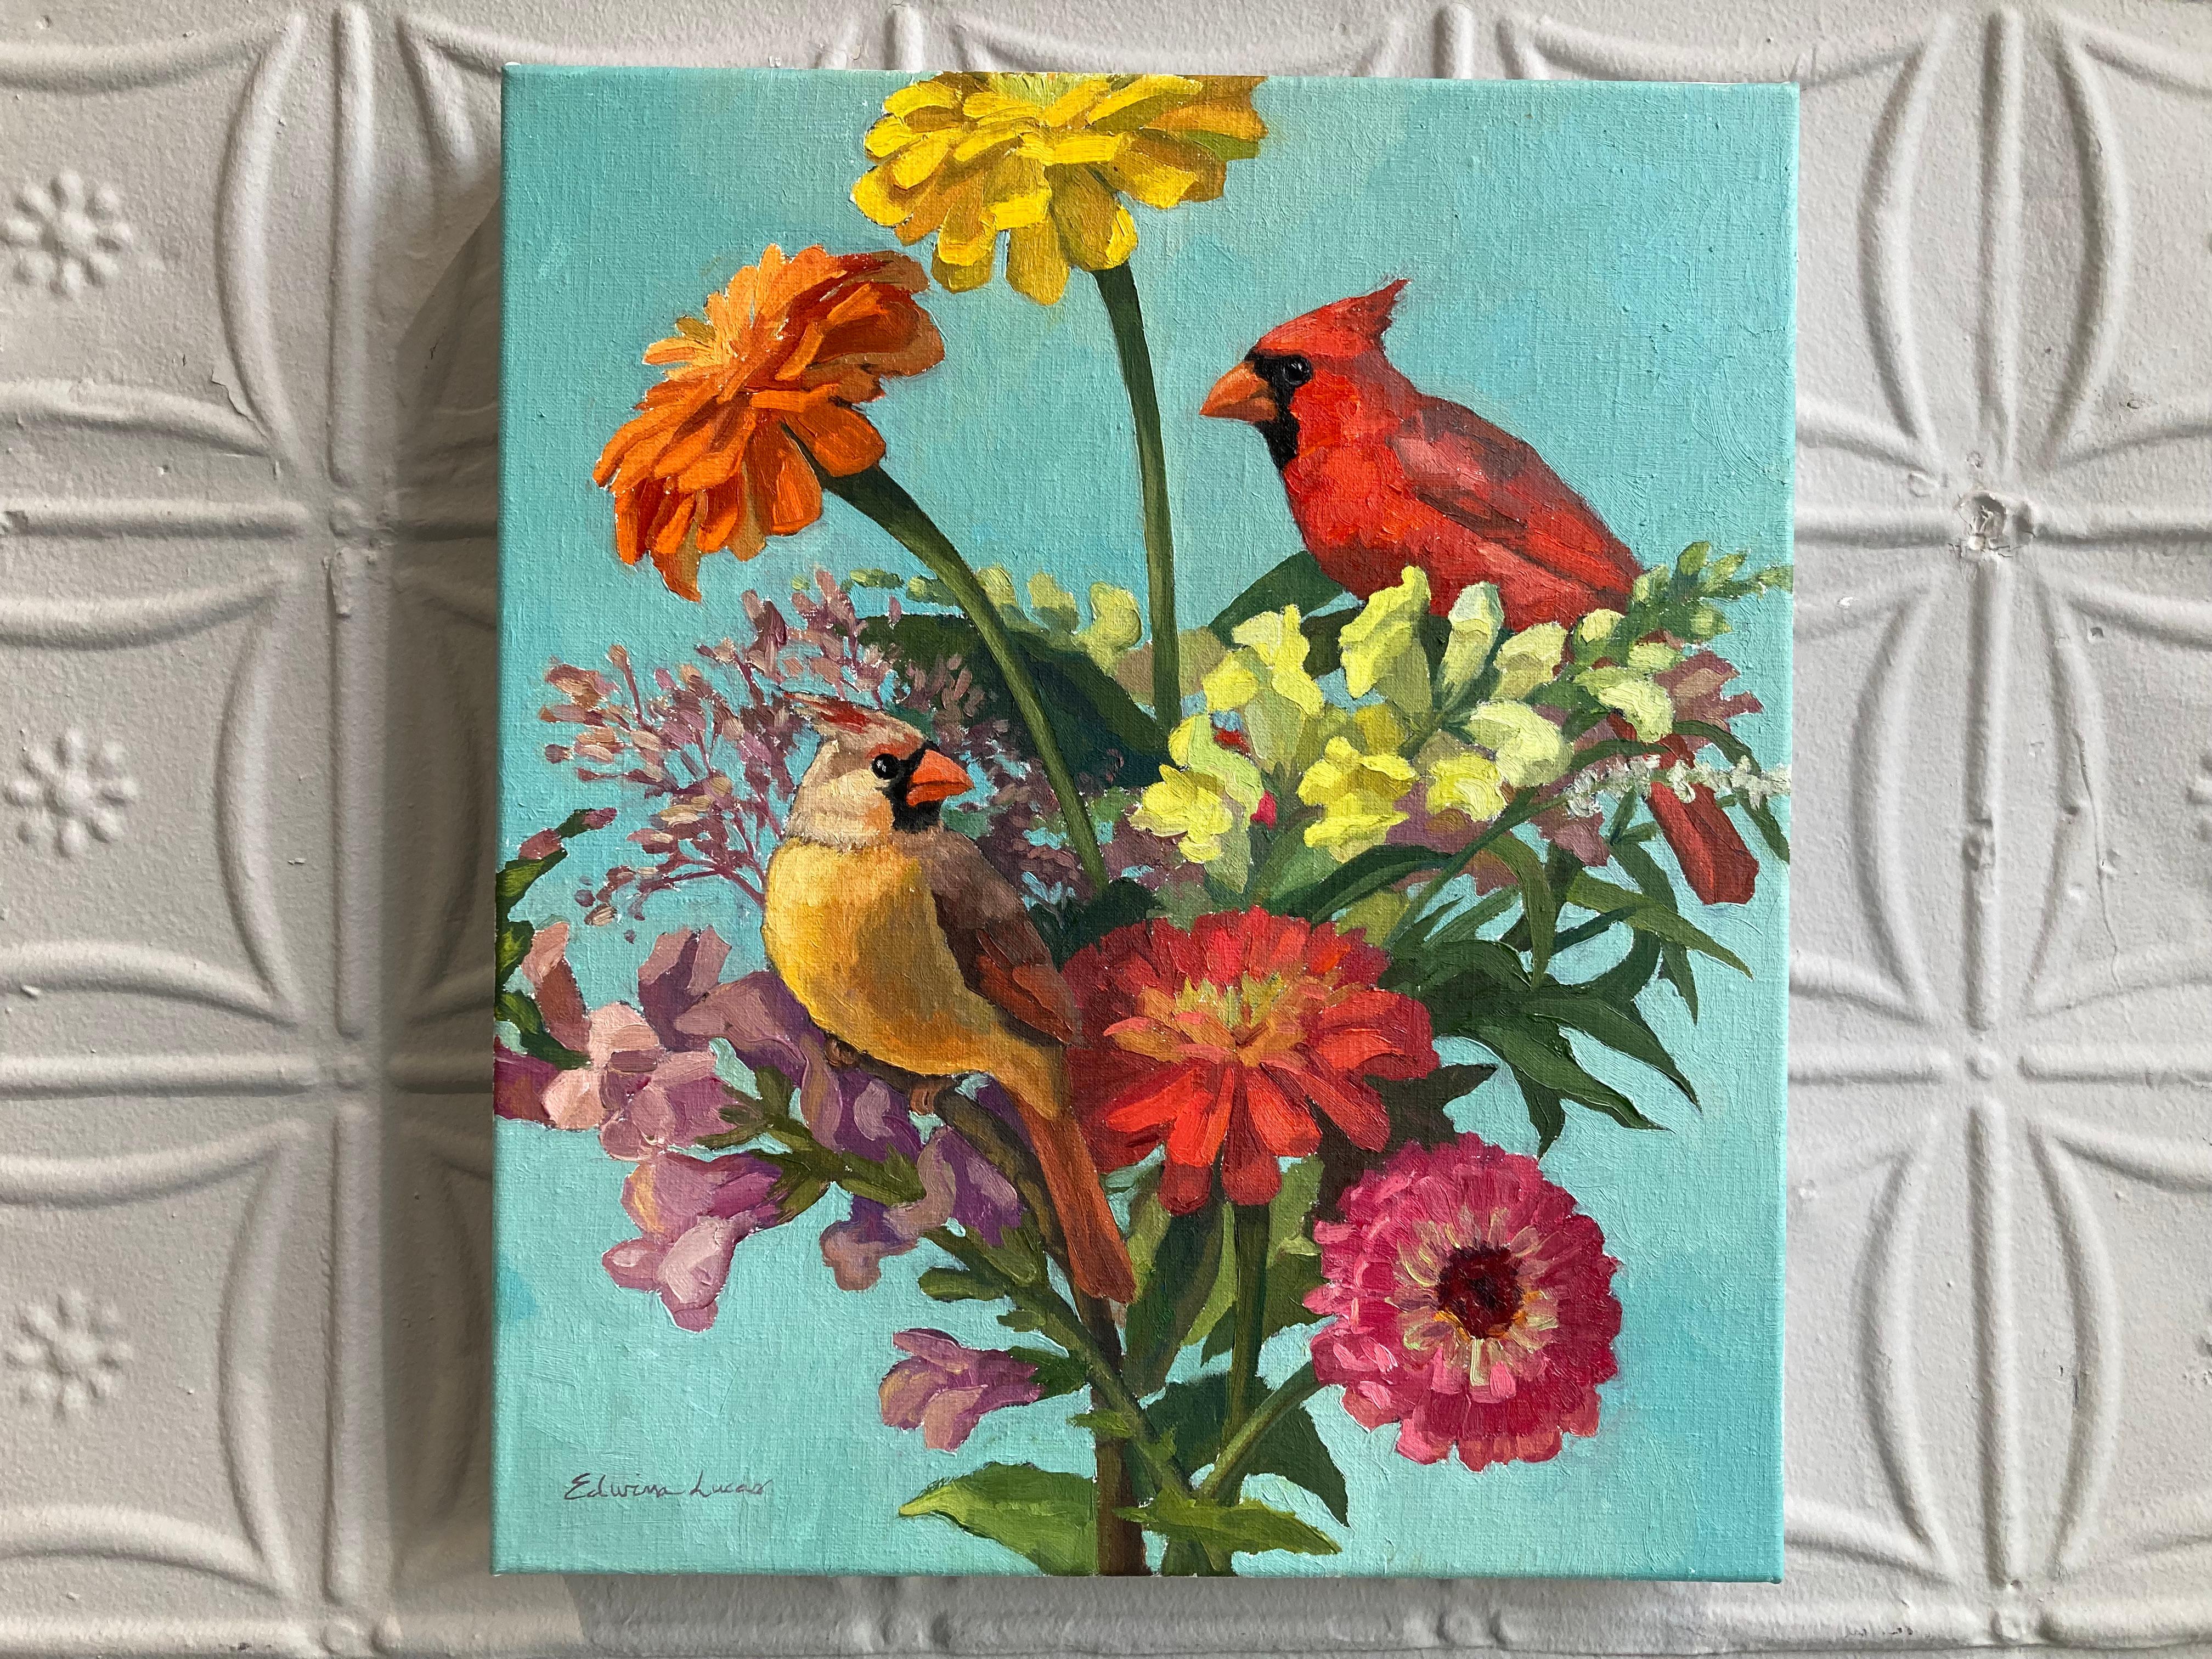 Two Cardinal birds sit on colorful flowers in this American Realist painting. An abstracted blue background allows the viewer to focus on the still life. Lucas is masterful at distilling a messy world into beautiful and simplified compositions.